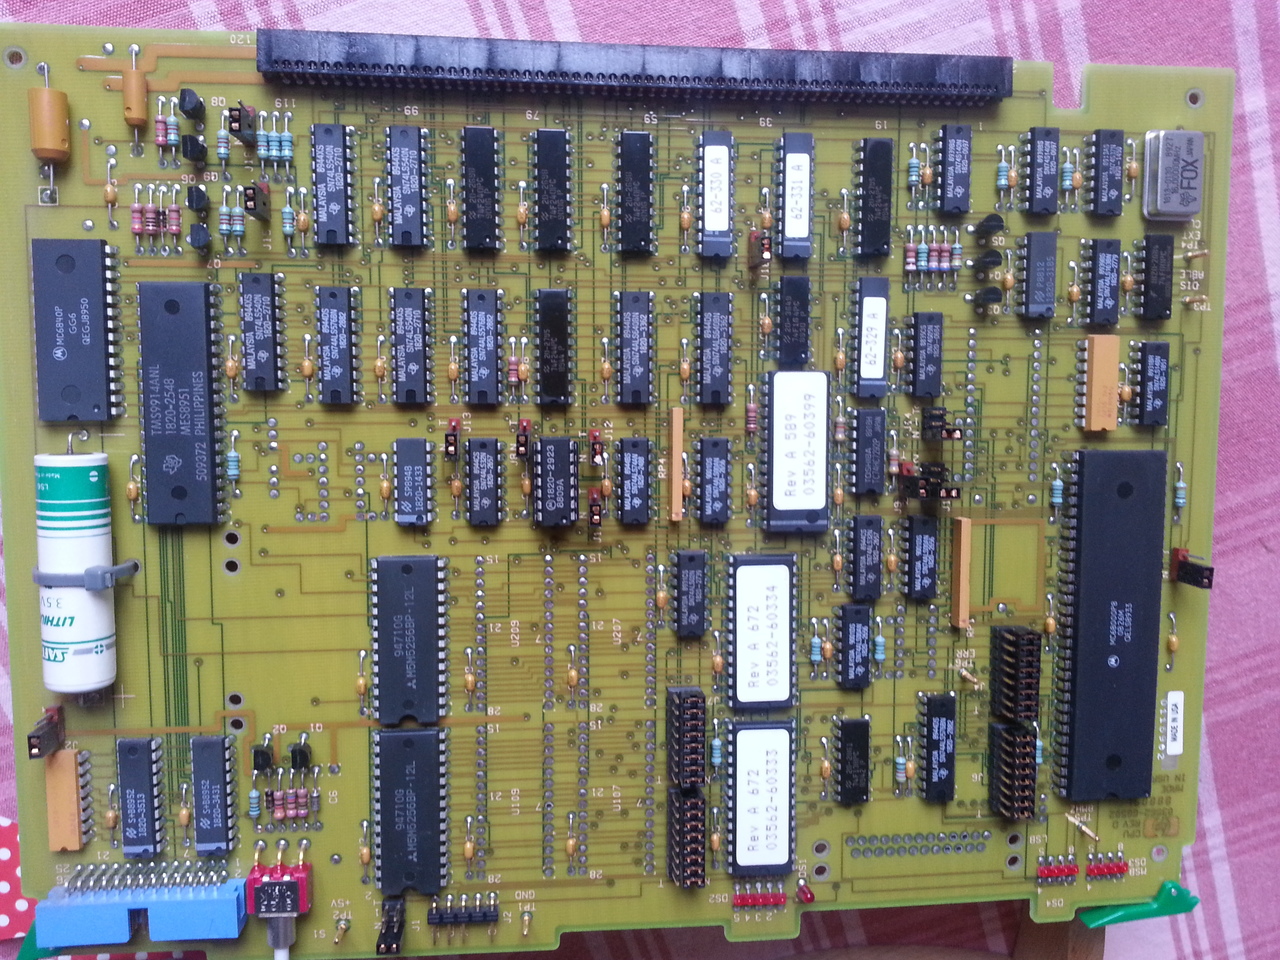 Picture of the A2 CPU board of the HP3562A